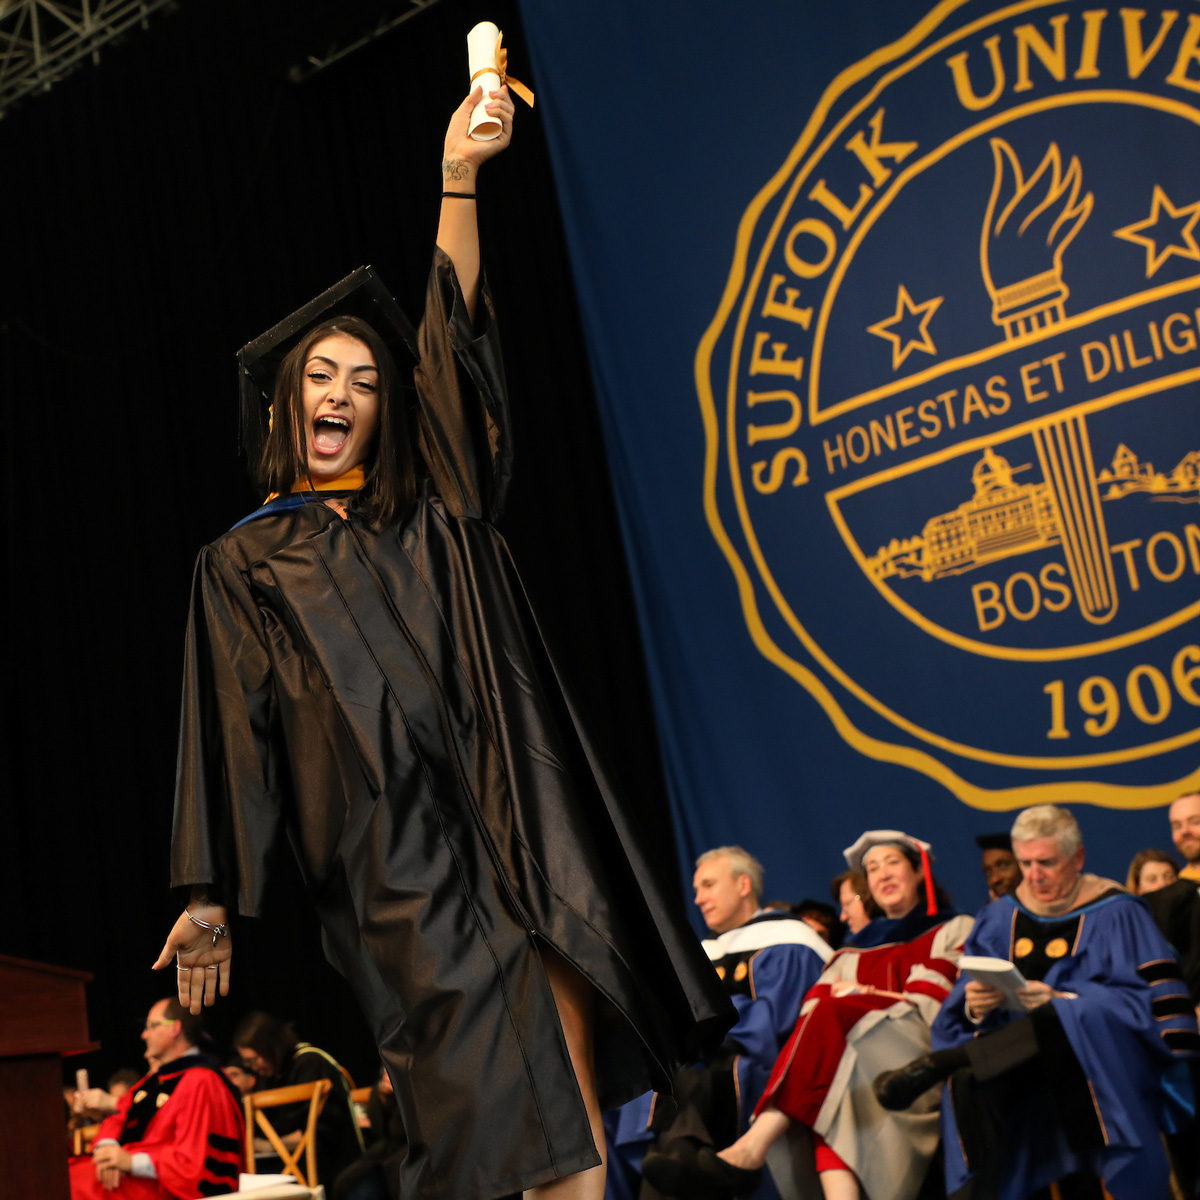 Olivia LeDonne holds up her scroll on stage during Commencement.